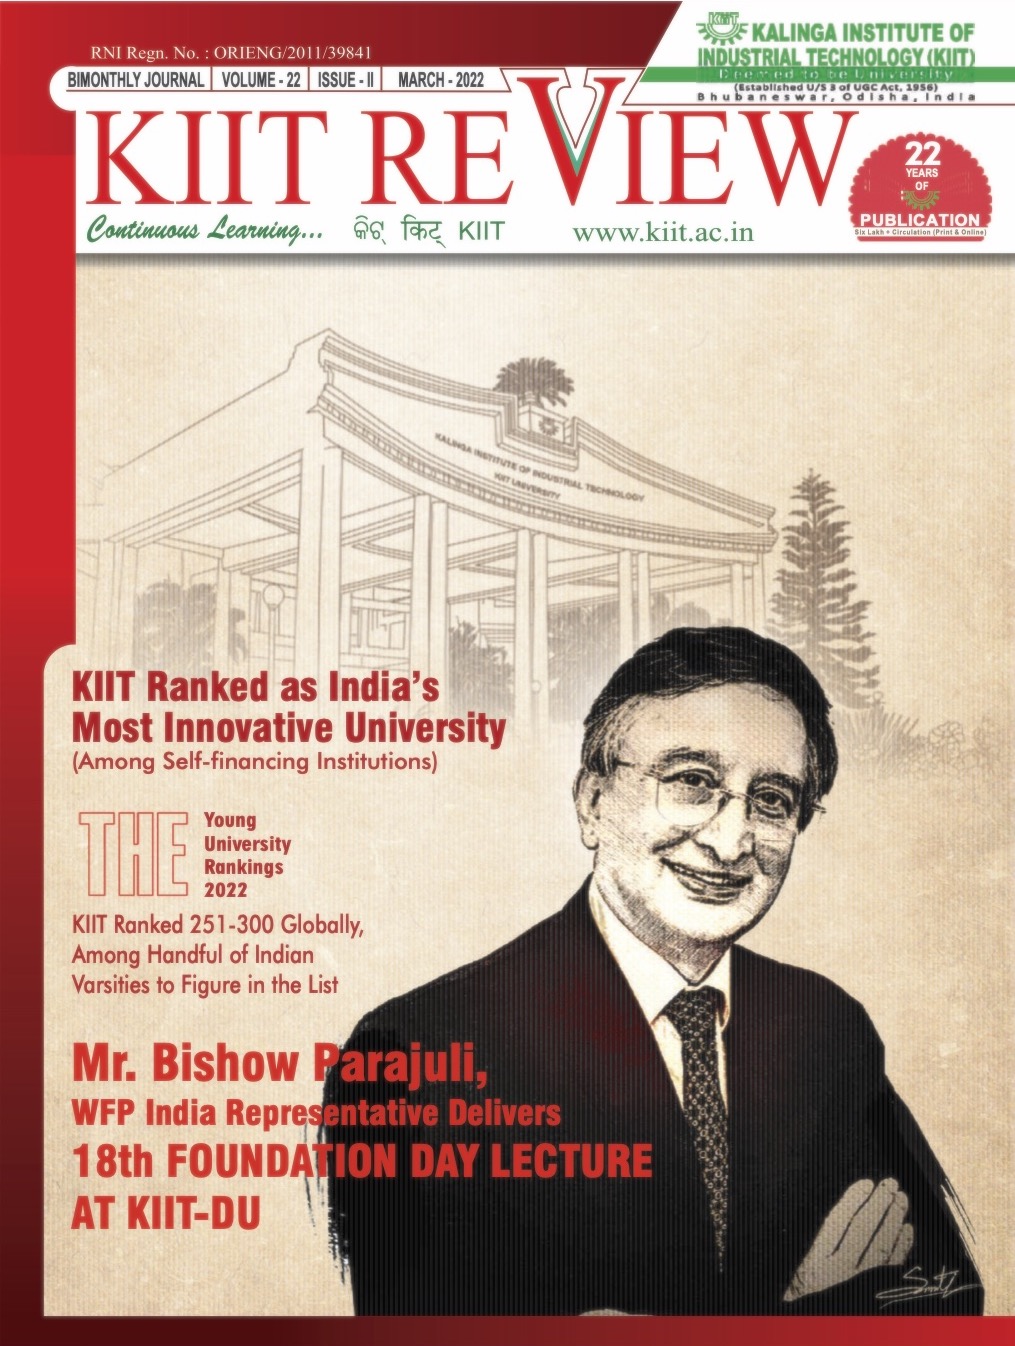 KIIT Review March 2022